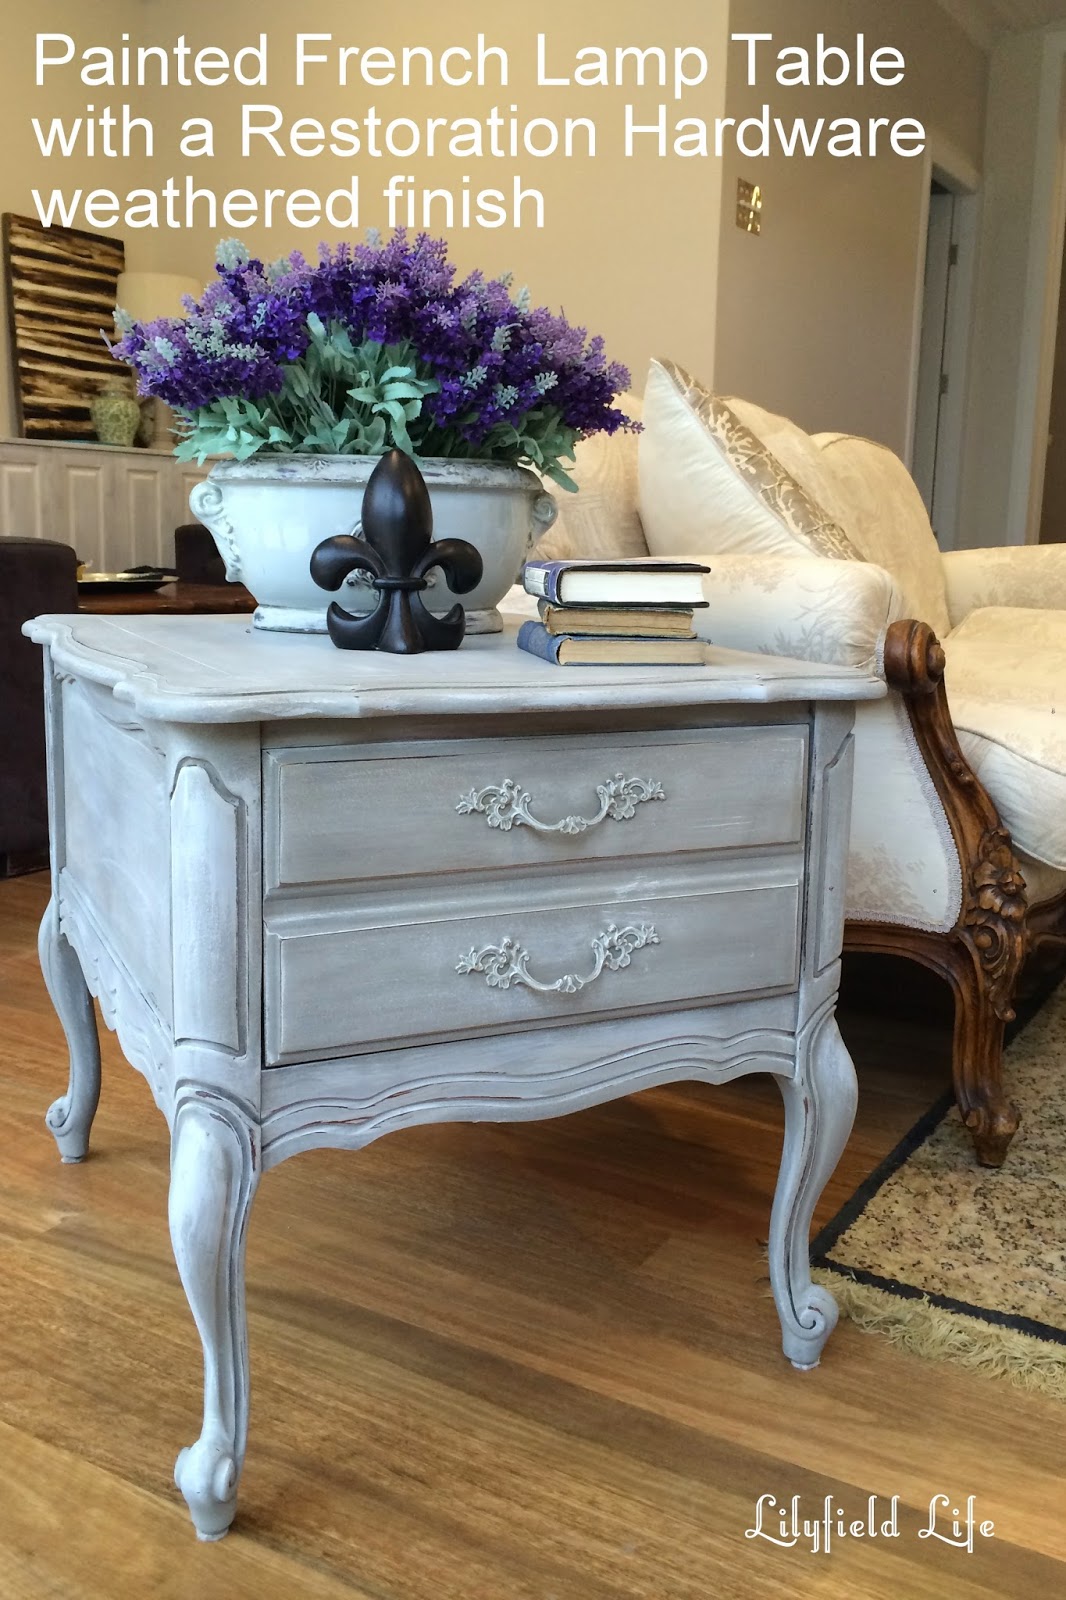 Restoration hardware weathered finish on a french style lamp table by Lilyfield life